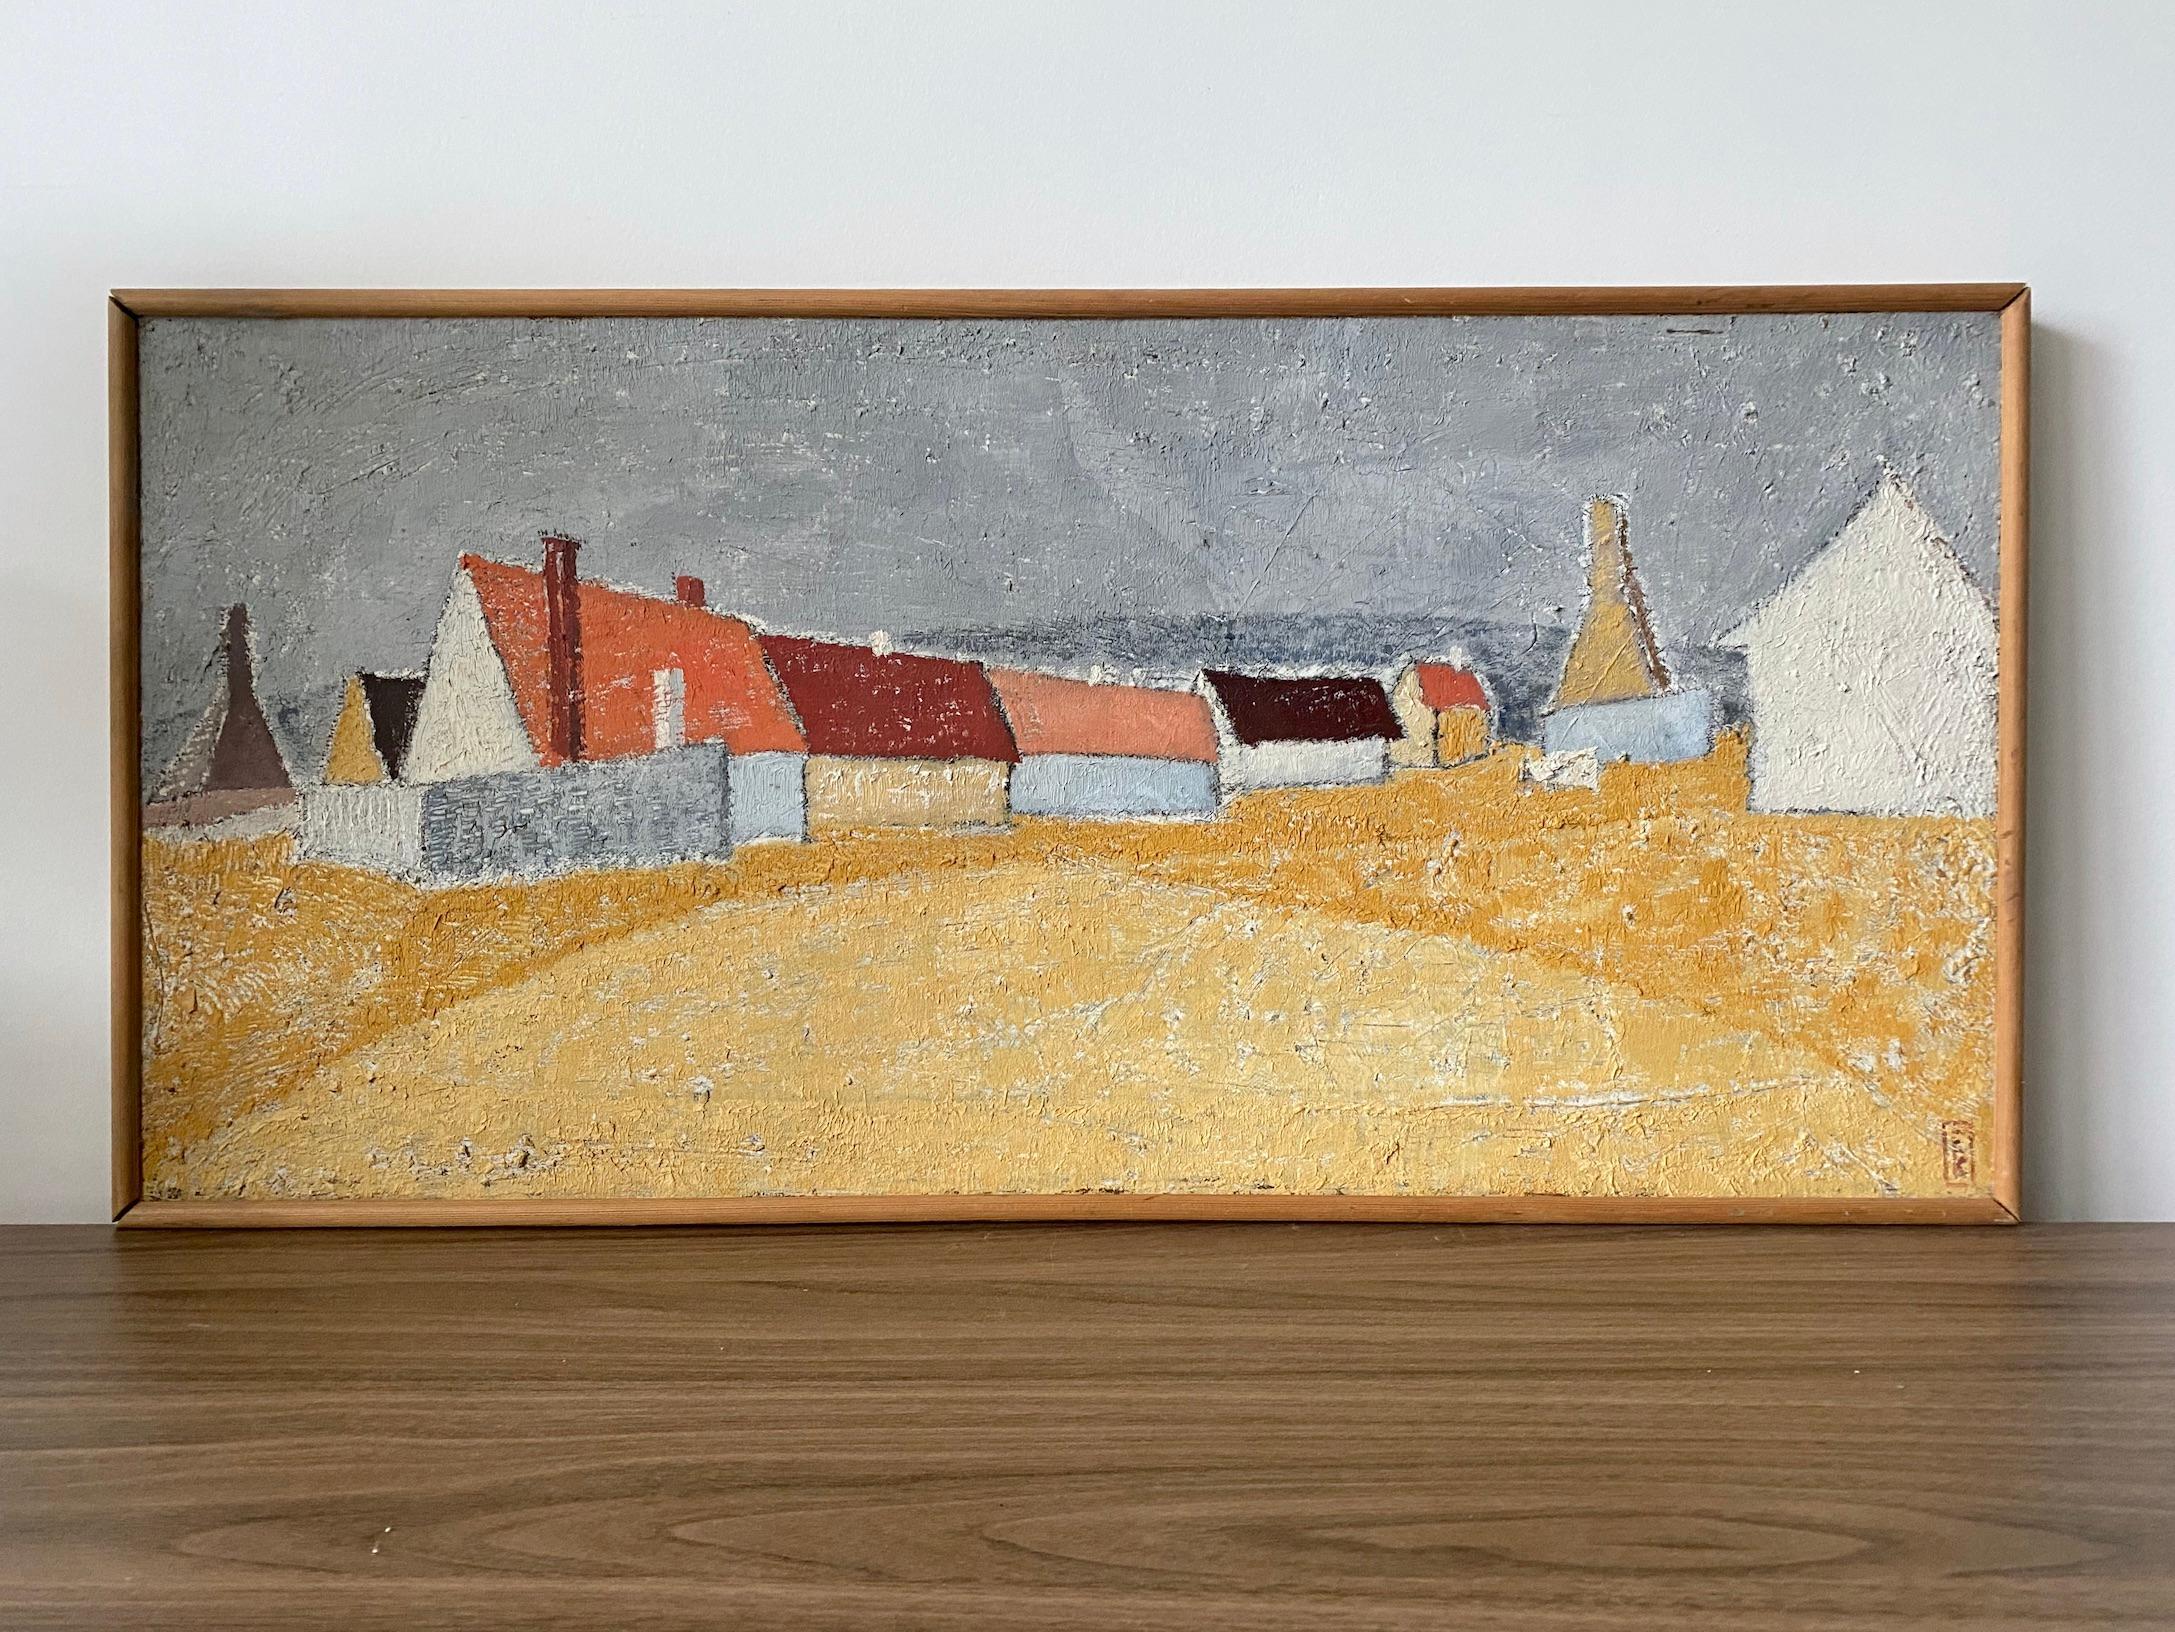 ORANGE ROAD
Size: 36.5 x 74 cm (including frame)
Oil on canvas

A wonderfully executed mid century modernist composition in oil, painted onto canvas.

Here the artist has played with colour, form and texture. A row of houses have been reduced to